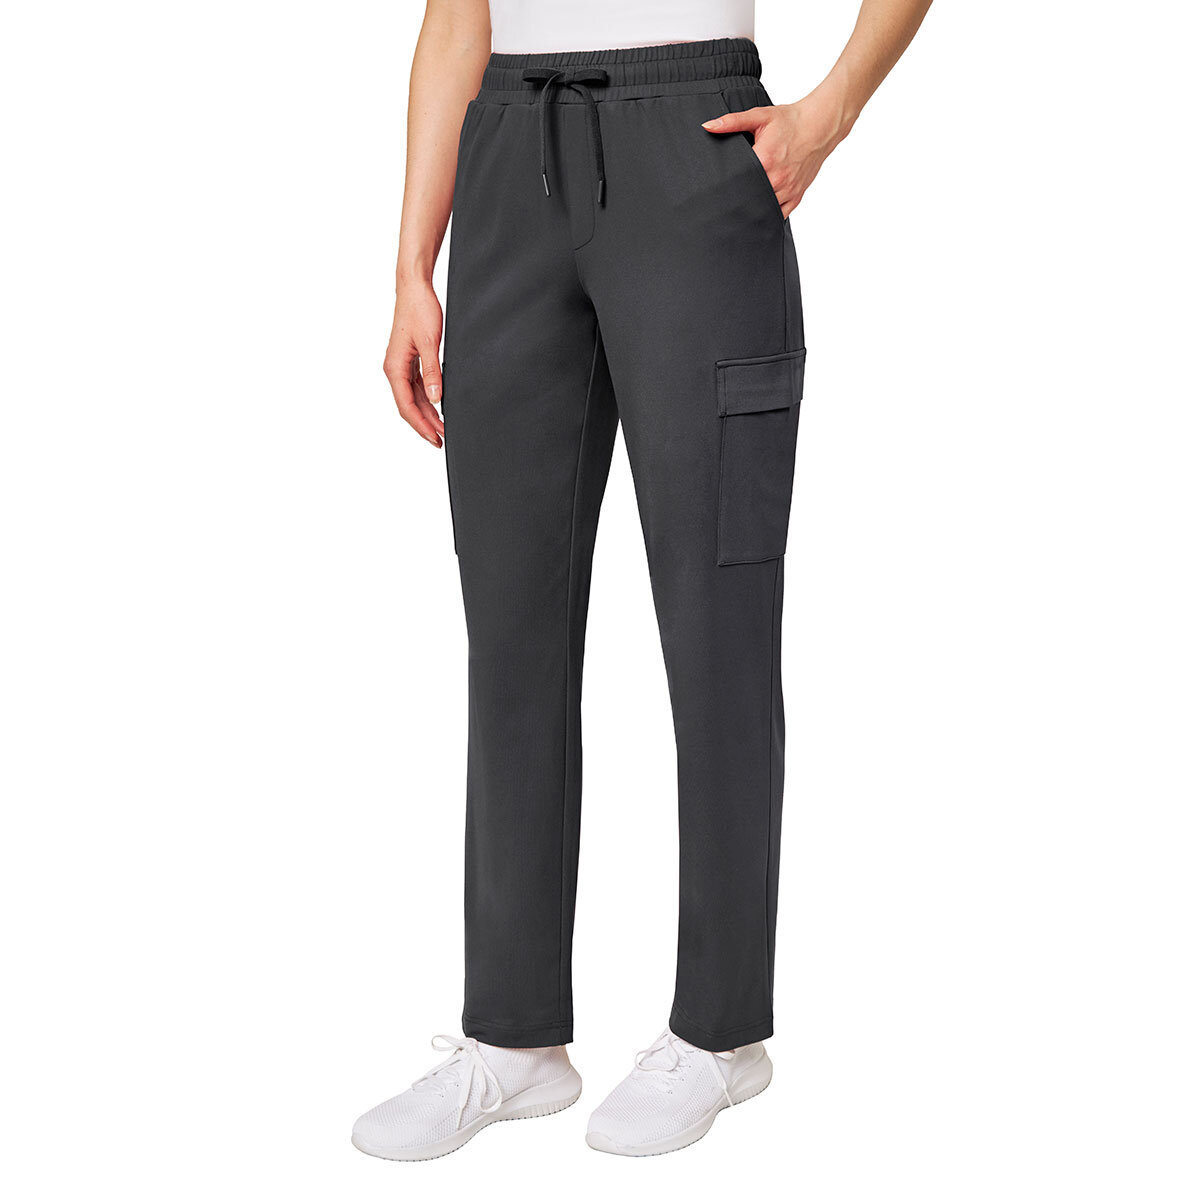 Mondetta Ladies Cargo Pocket Pant in 3 Colours and 4 Sizes